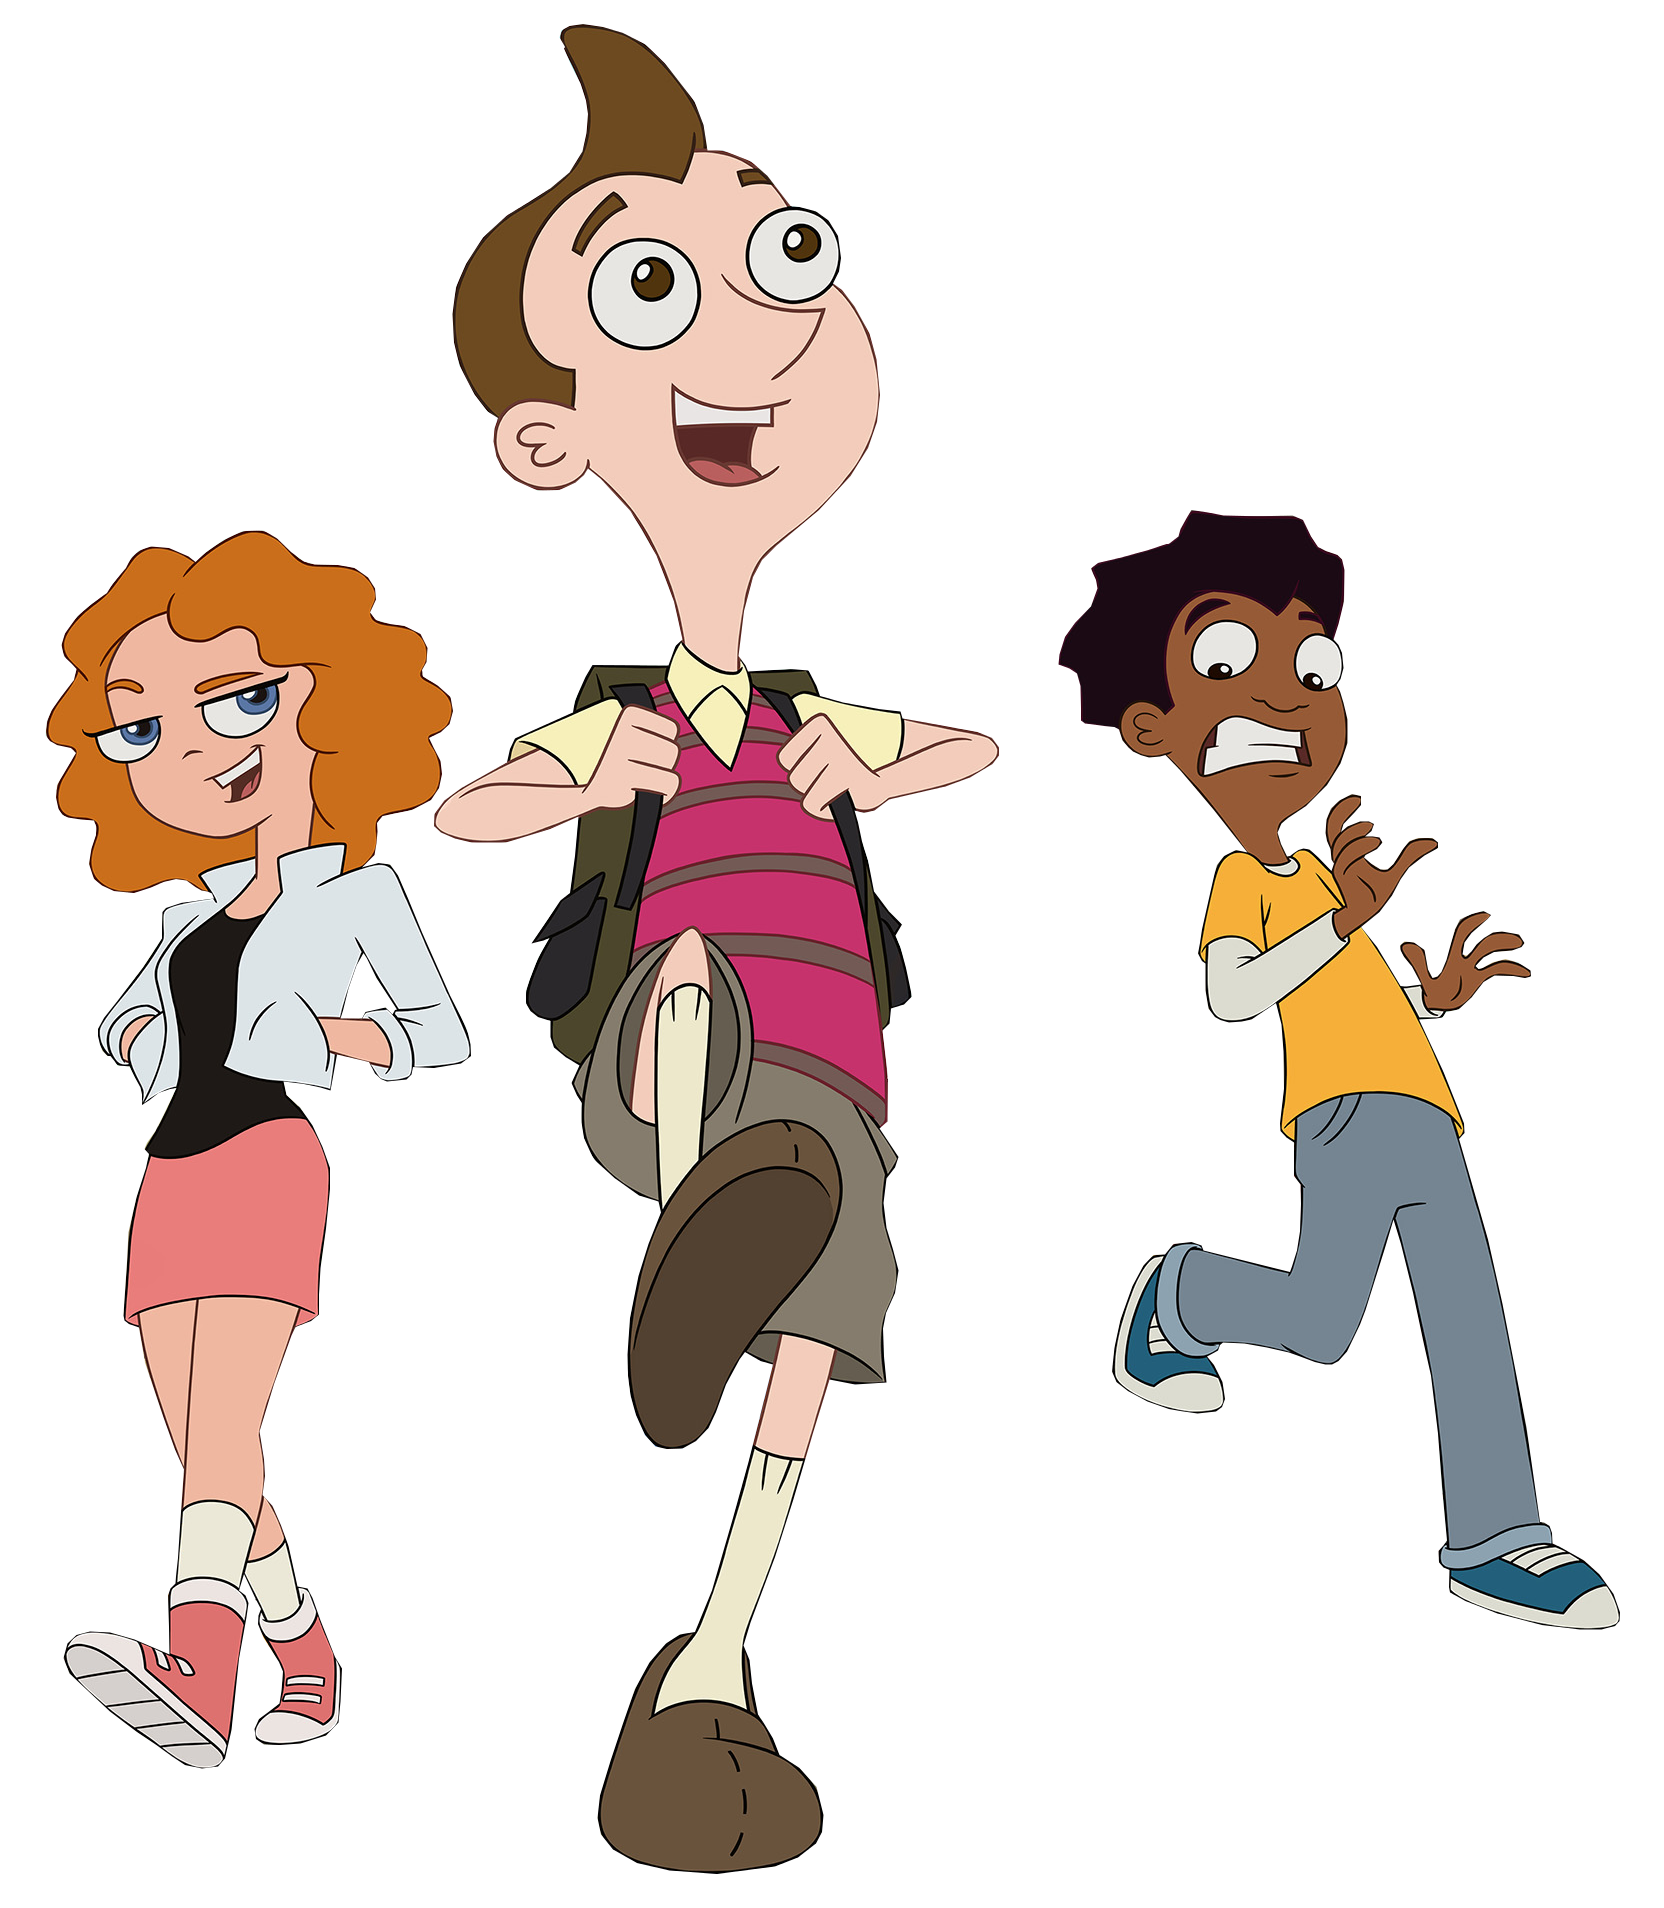 Image Triopng Milo Murphys Law Wiki Tiếng Việt Fandom Powered By Wikia 